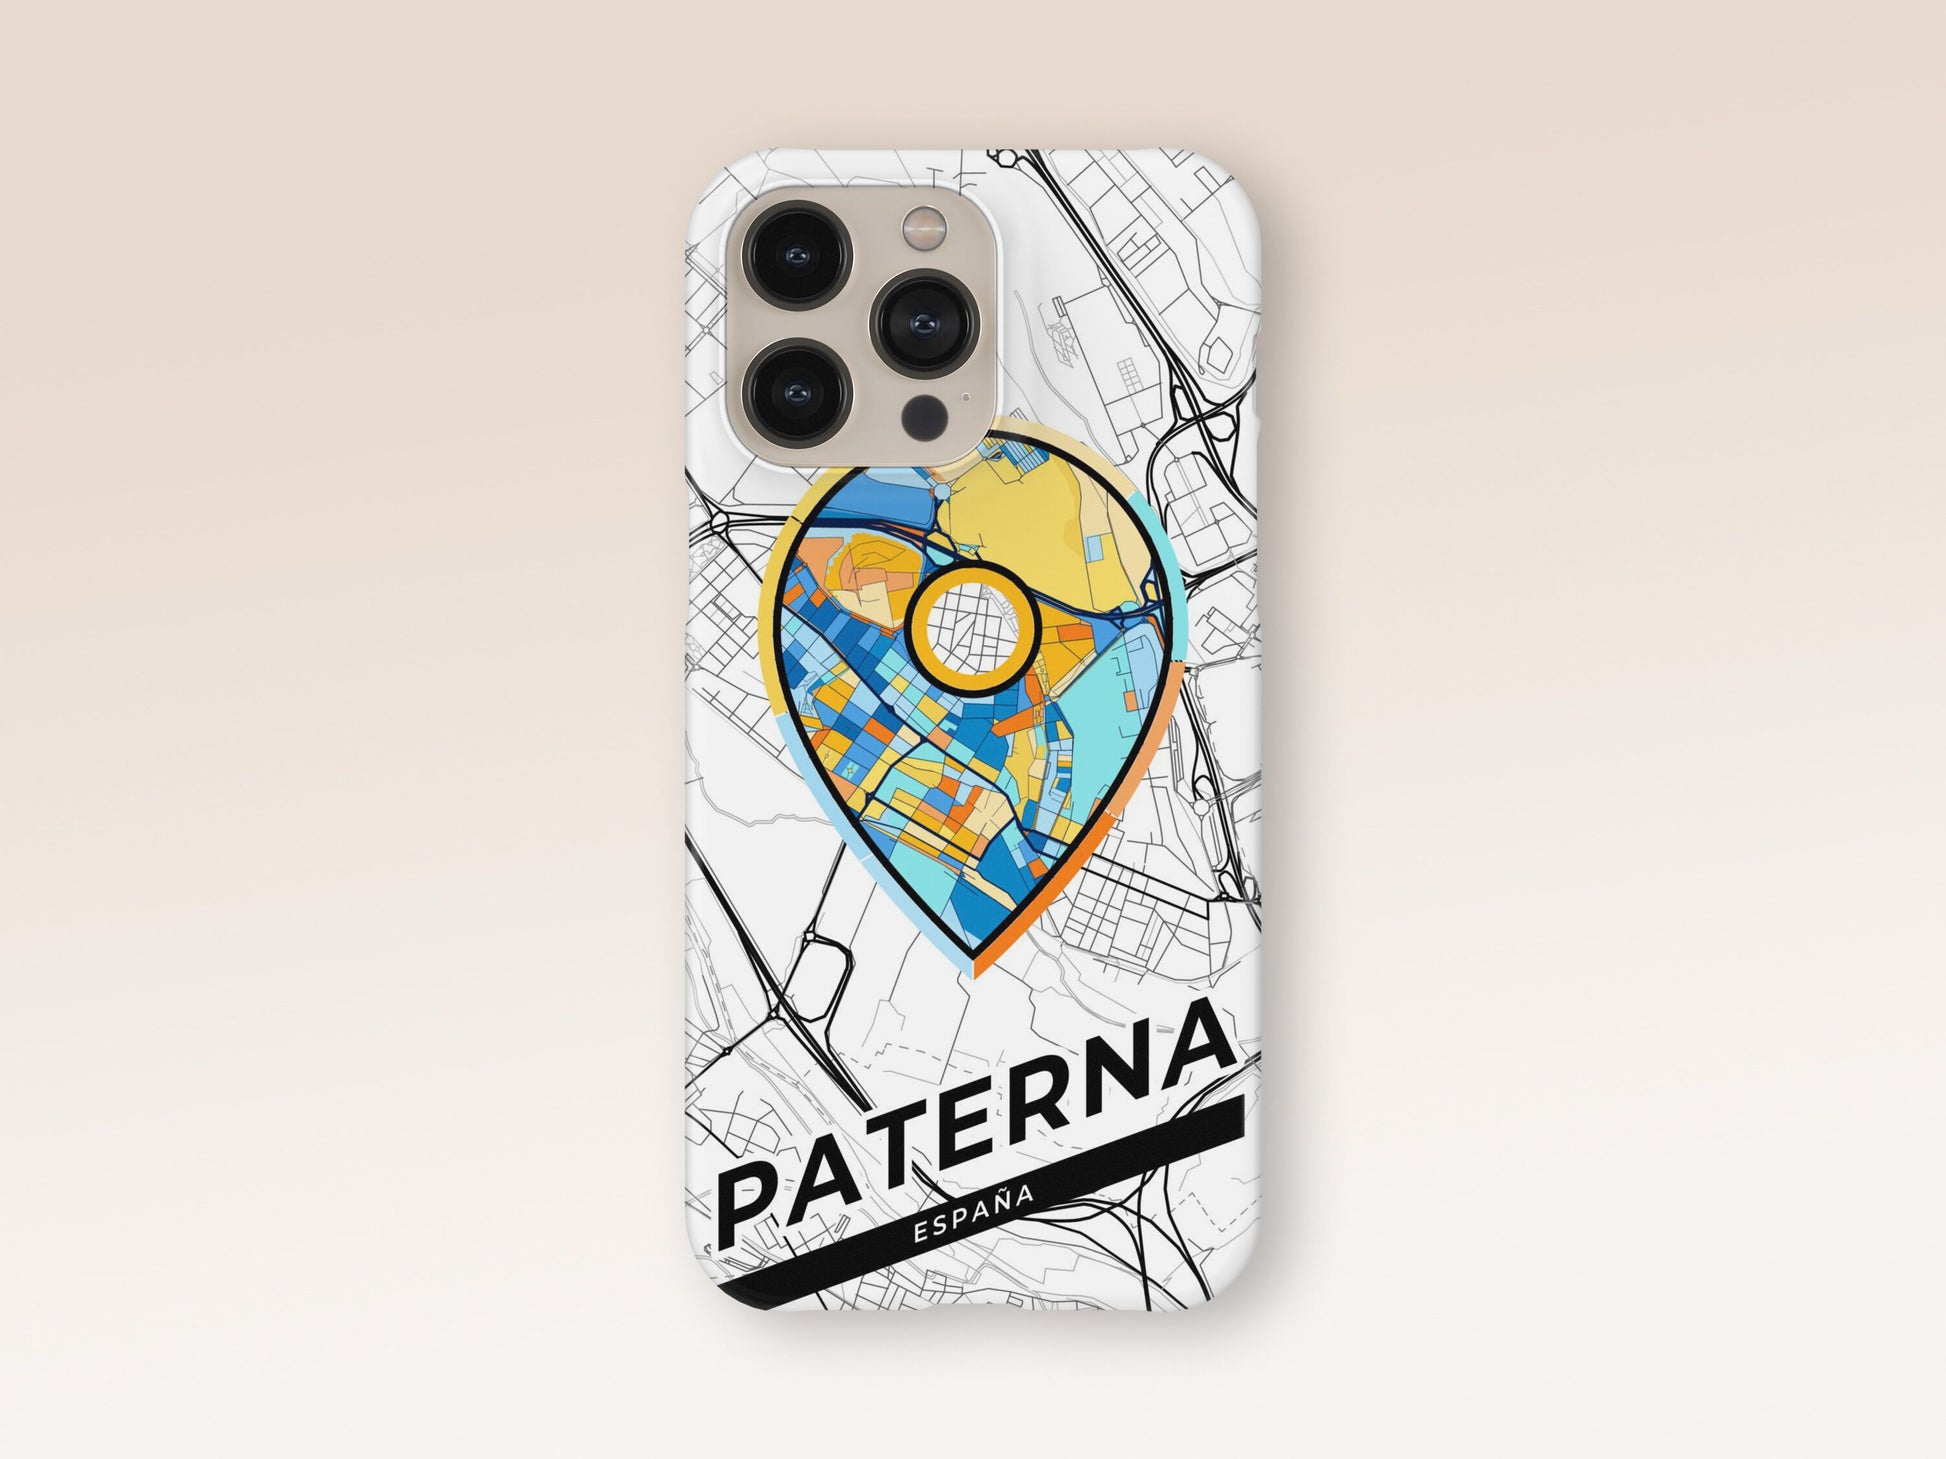 Paterna Spain slim phone case with colorful icon 1